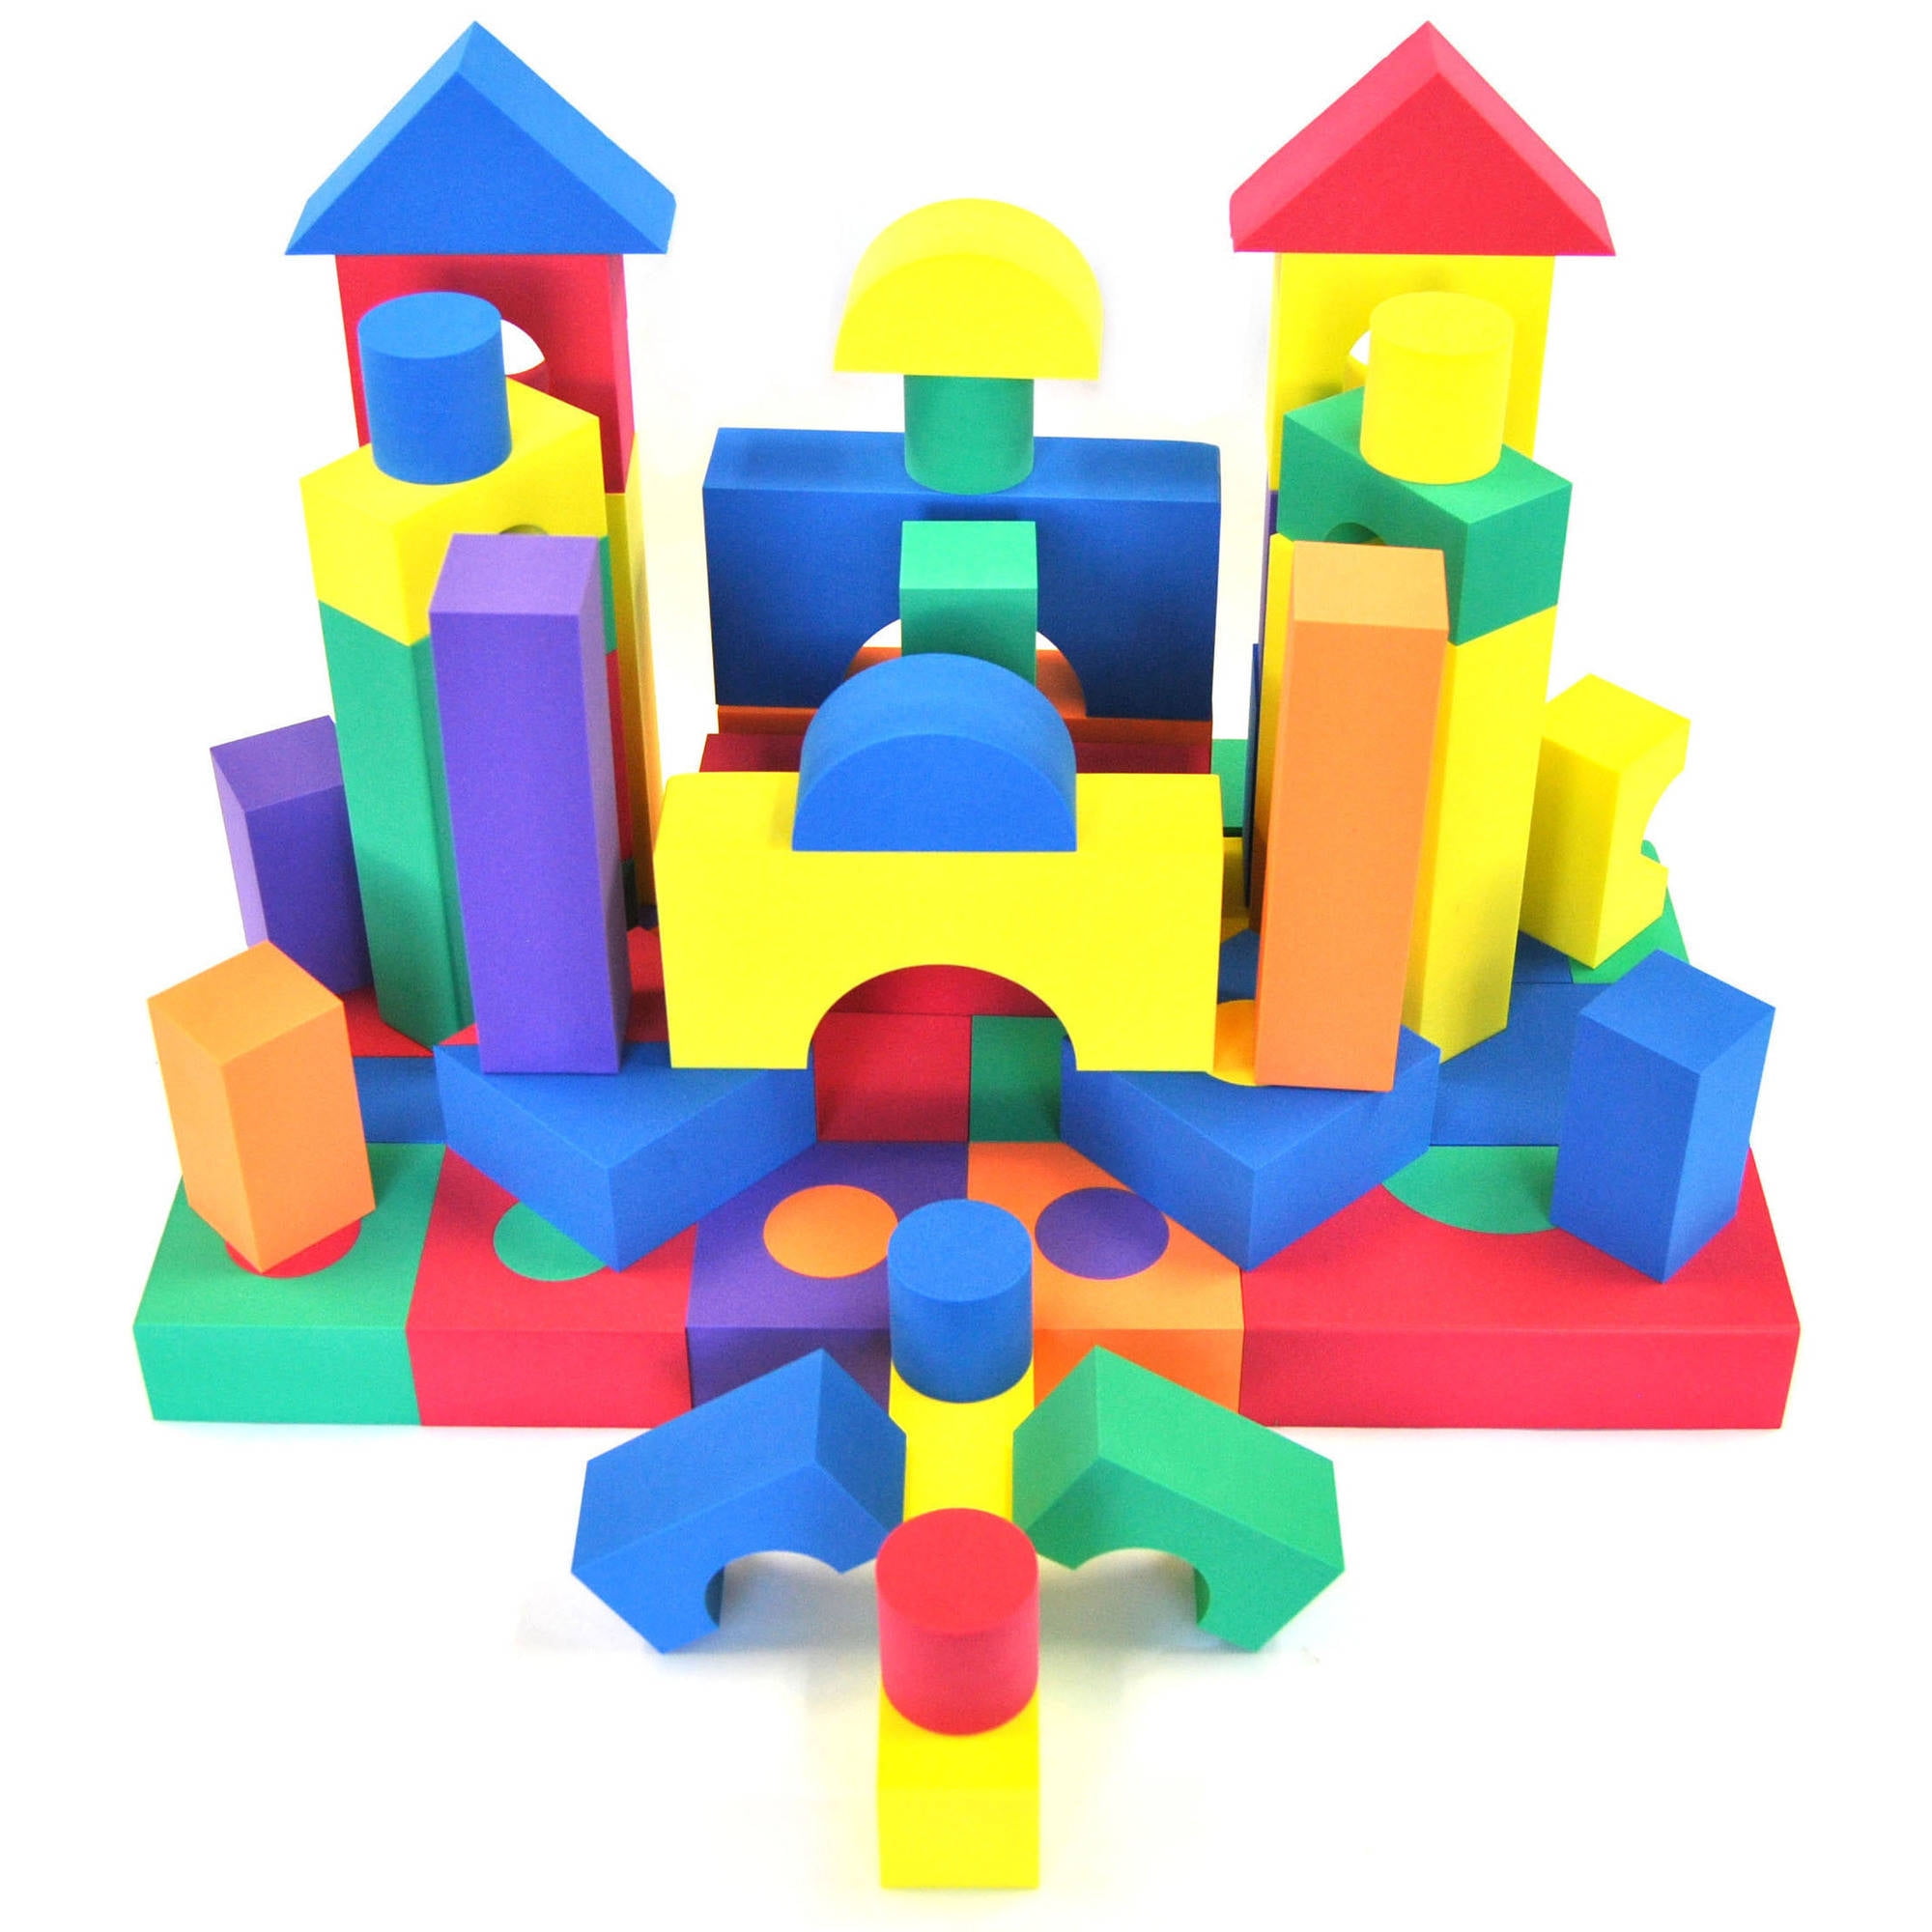 70 Piece Non-Toxic Non-Recycled Quality Soft Foam Wonder Blocks for Children 